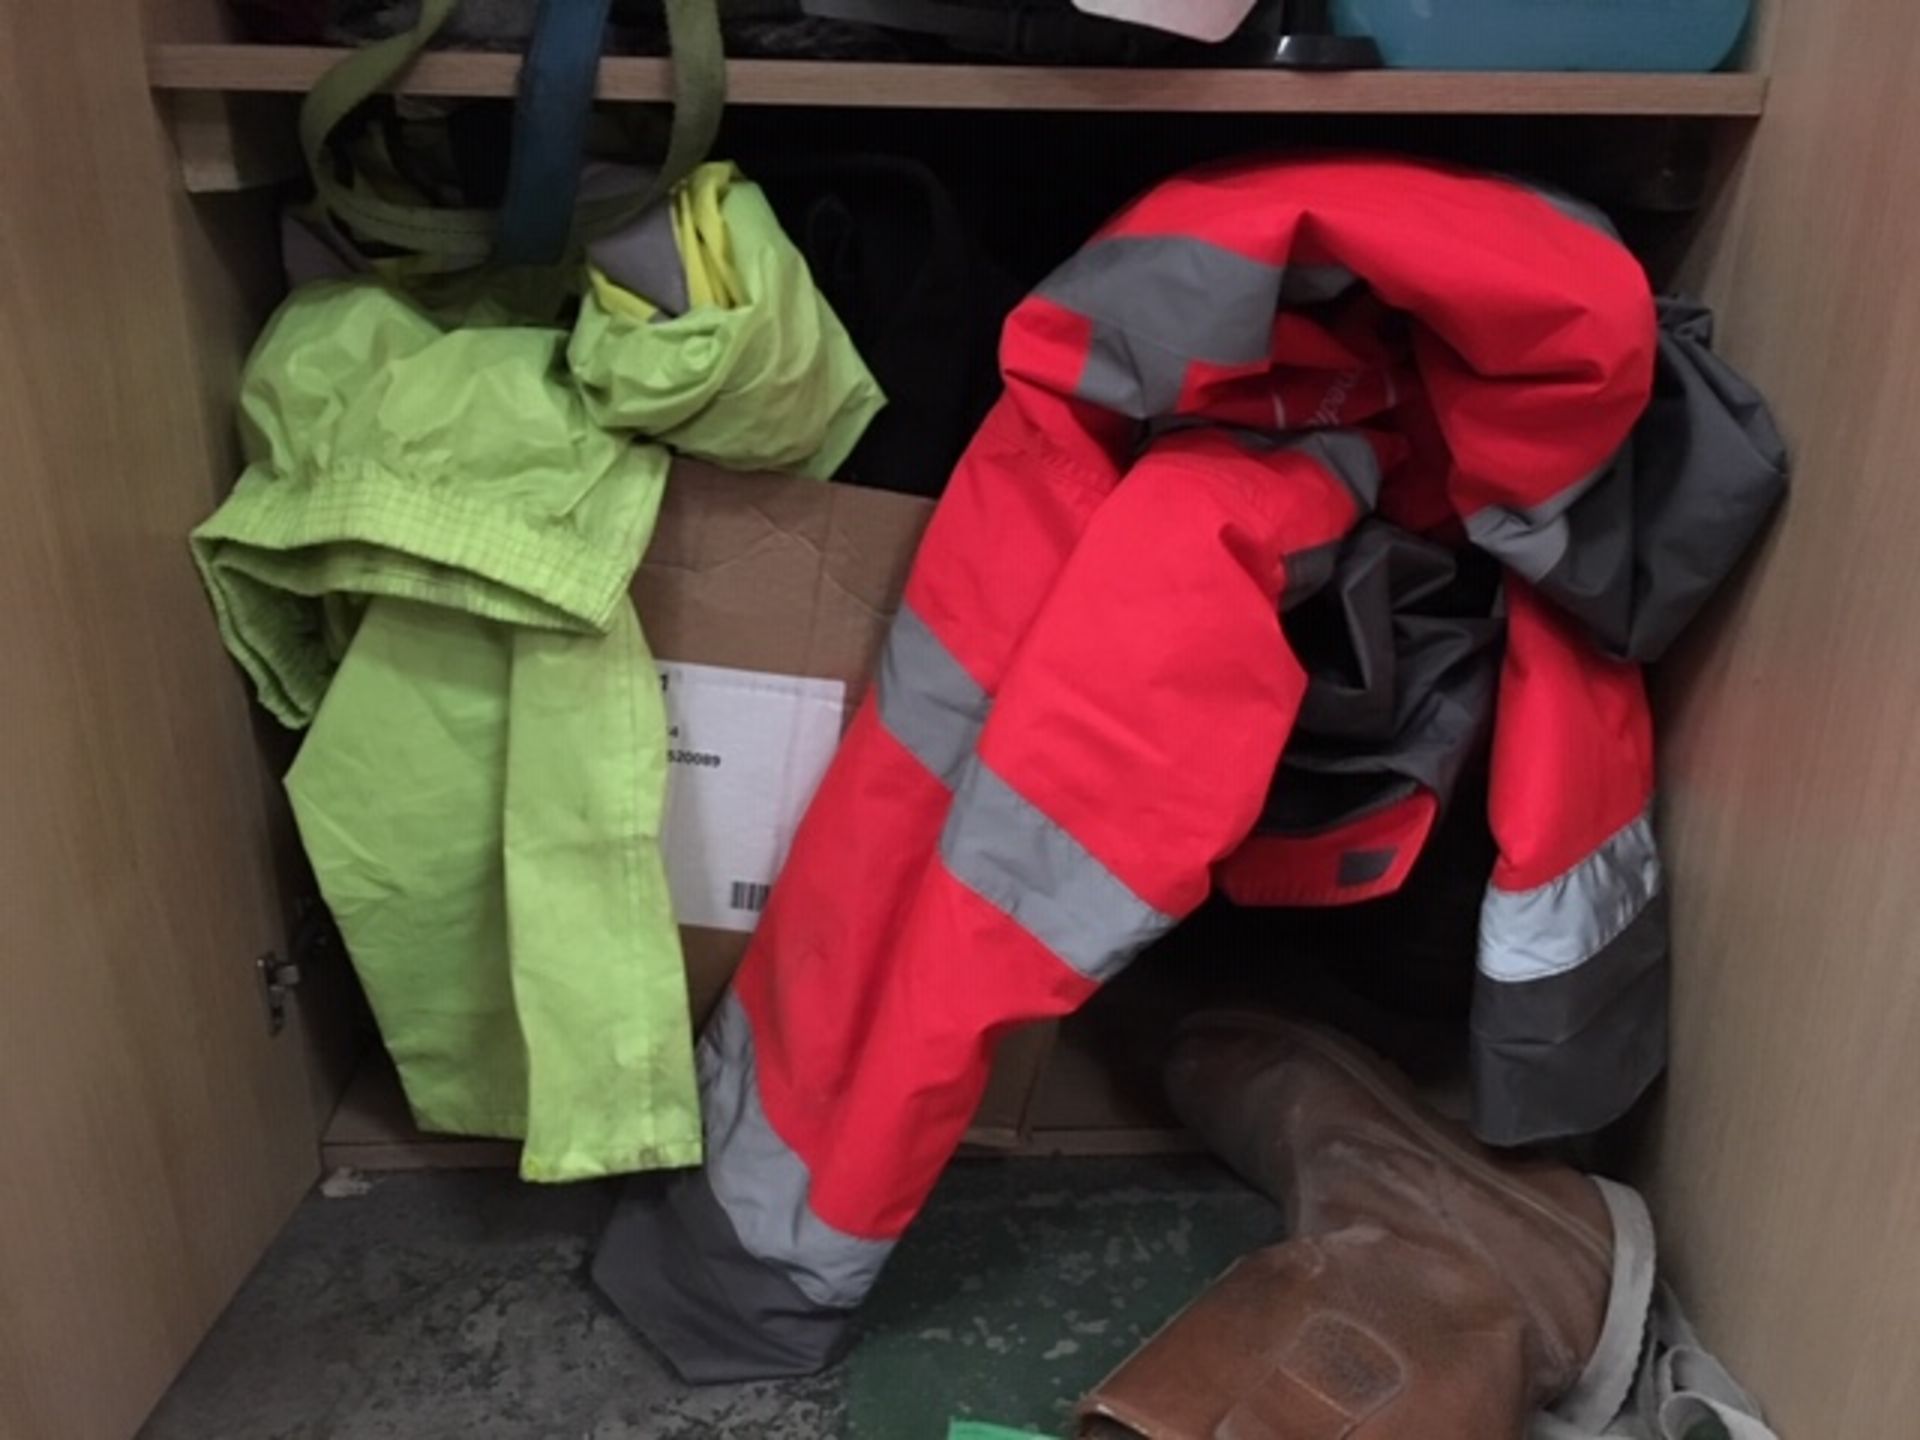 Contents of Wooden Filing Cabinet - Includes Hi-Vis Clothing, Ratchet Straps - Please see Photos - Image 2 of 4